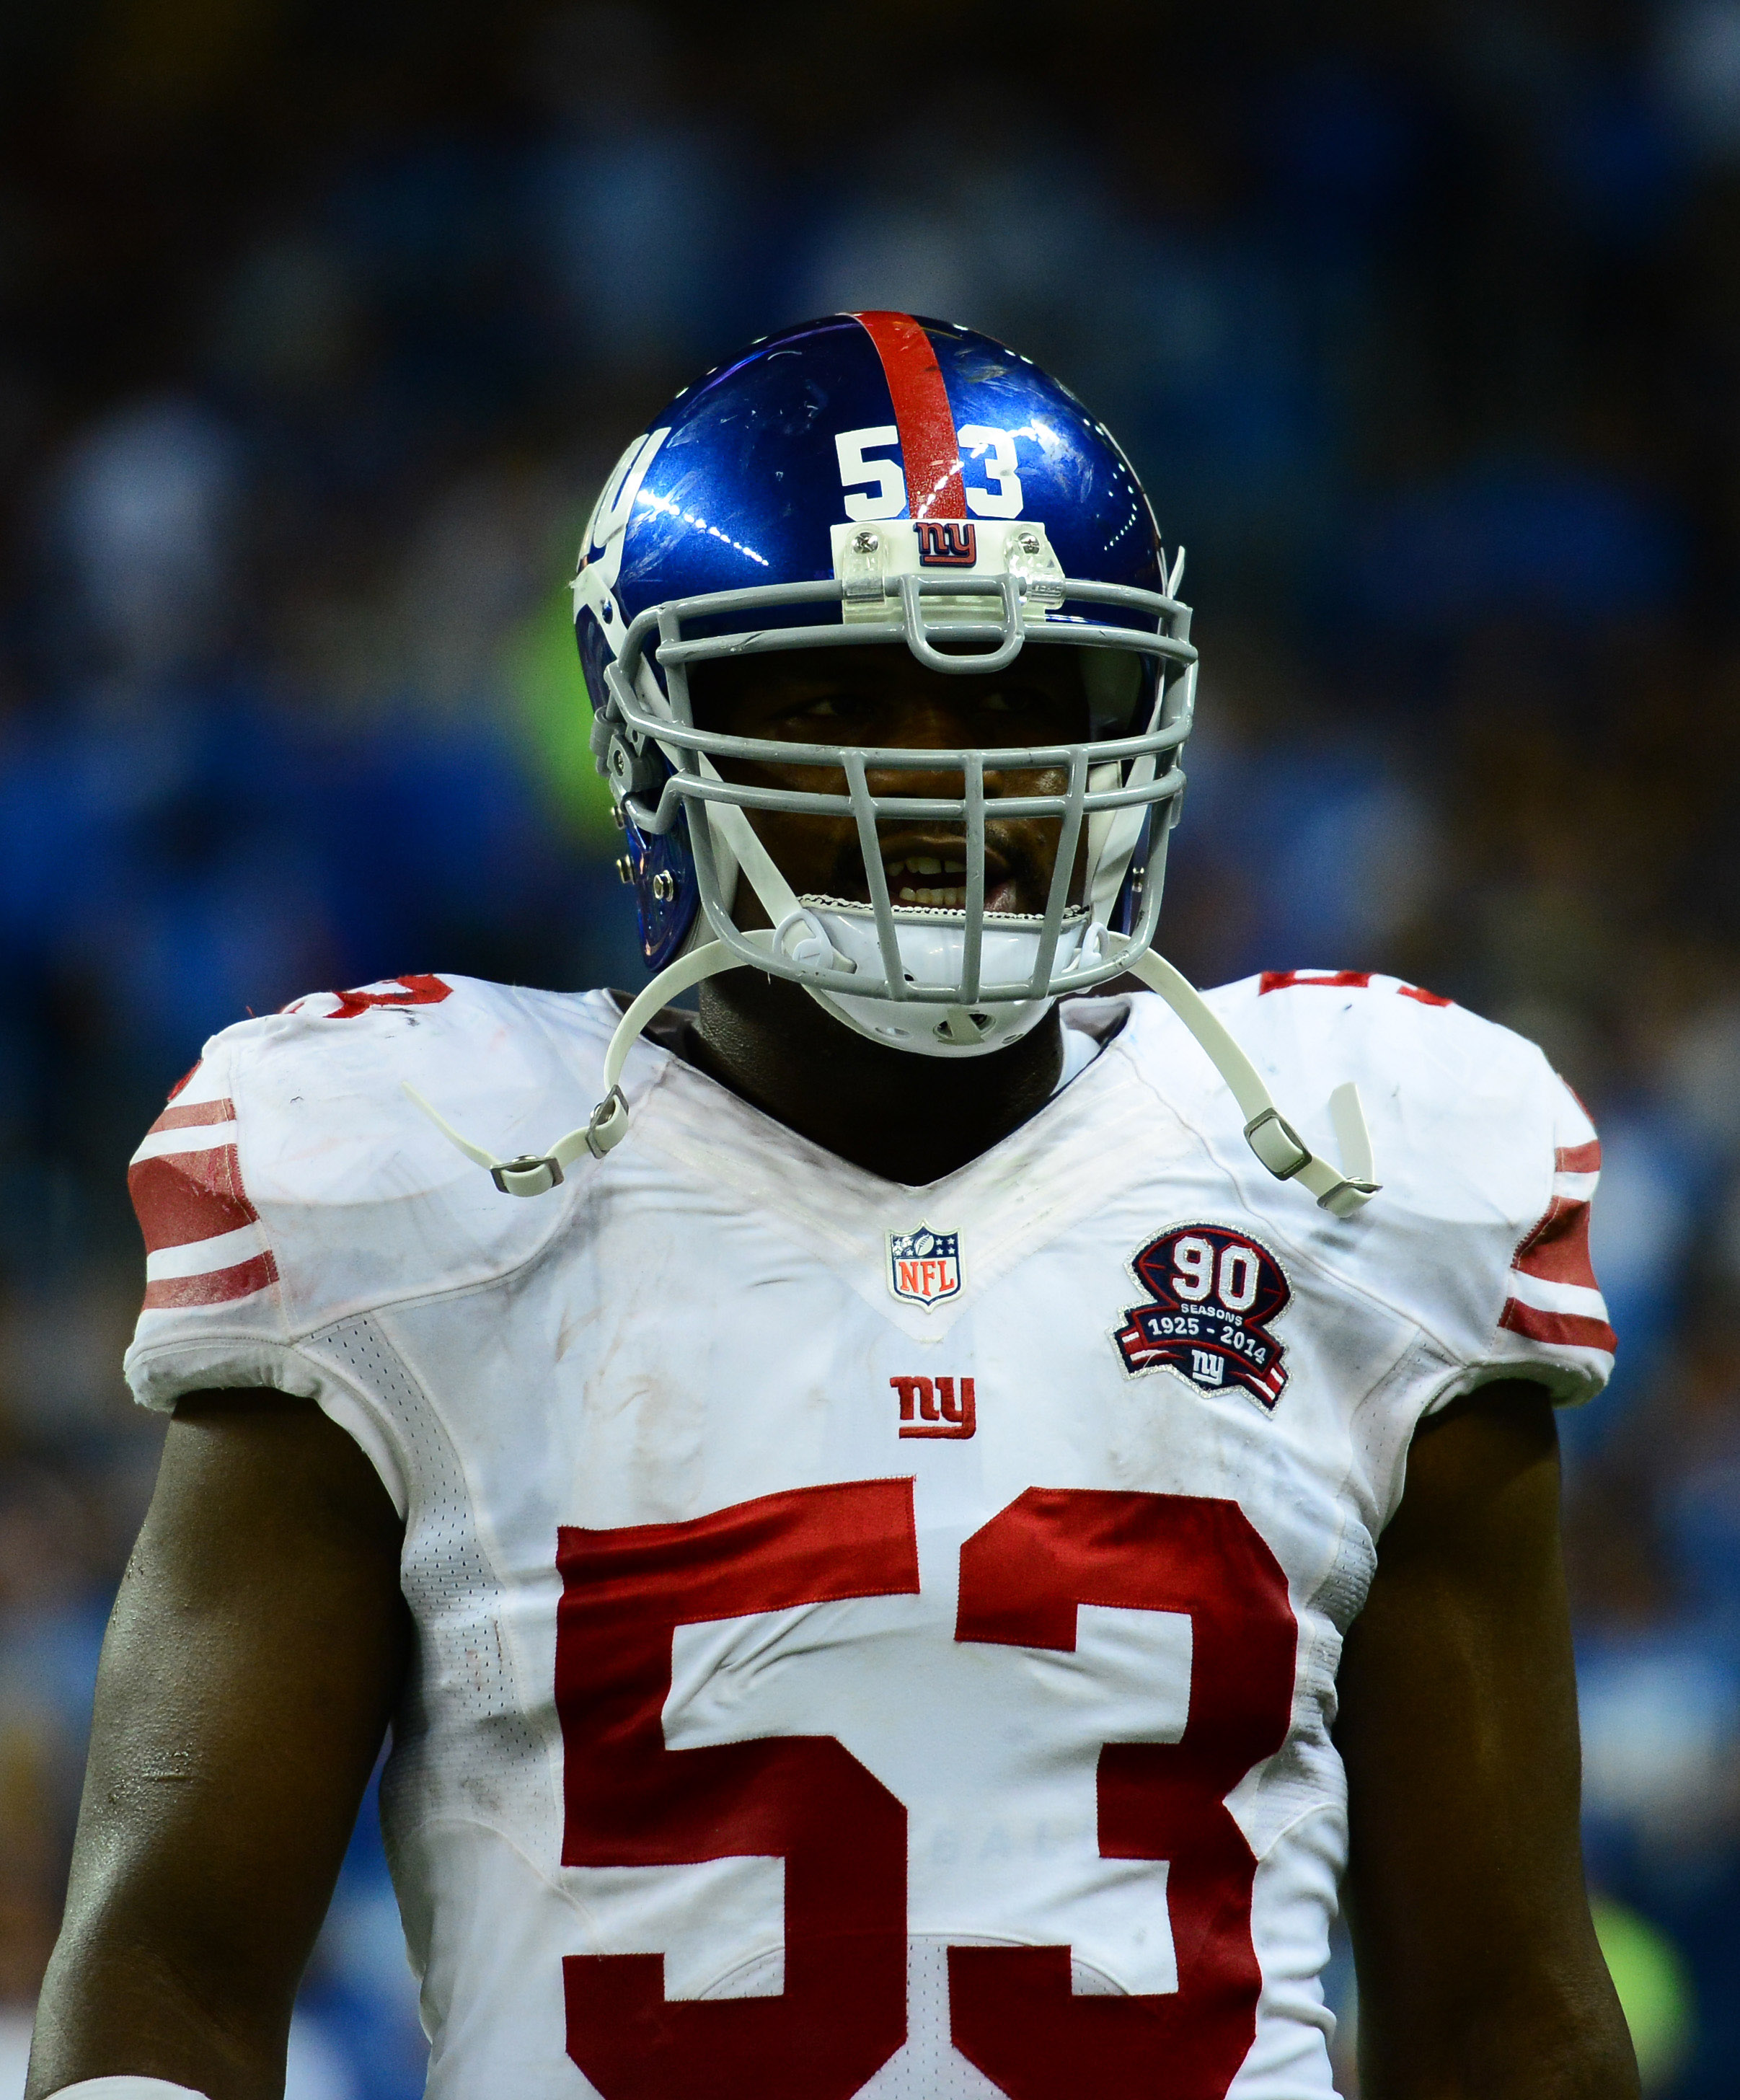 Jameel McClain was back to practice Thursday for the Giants